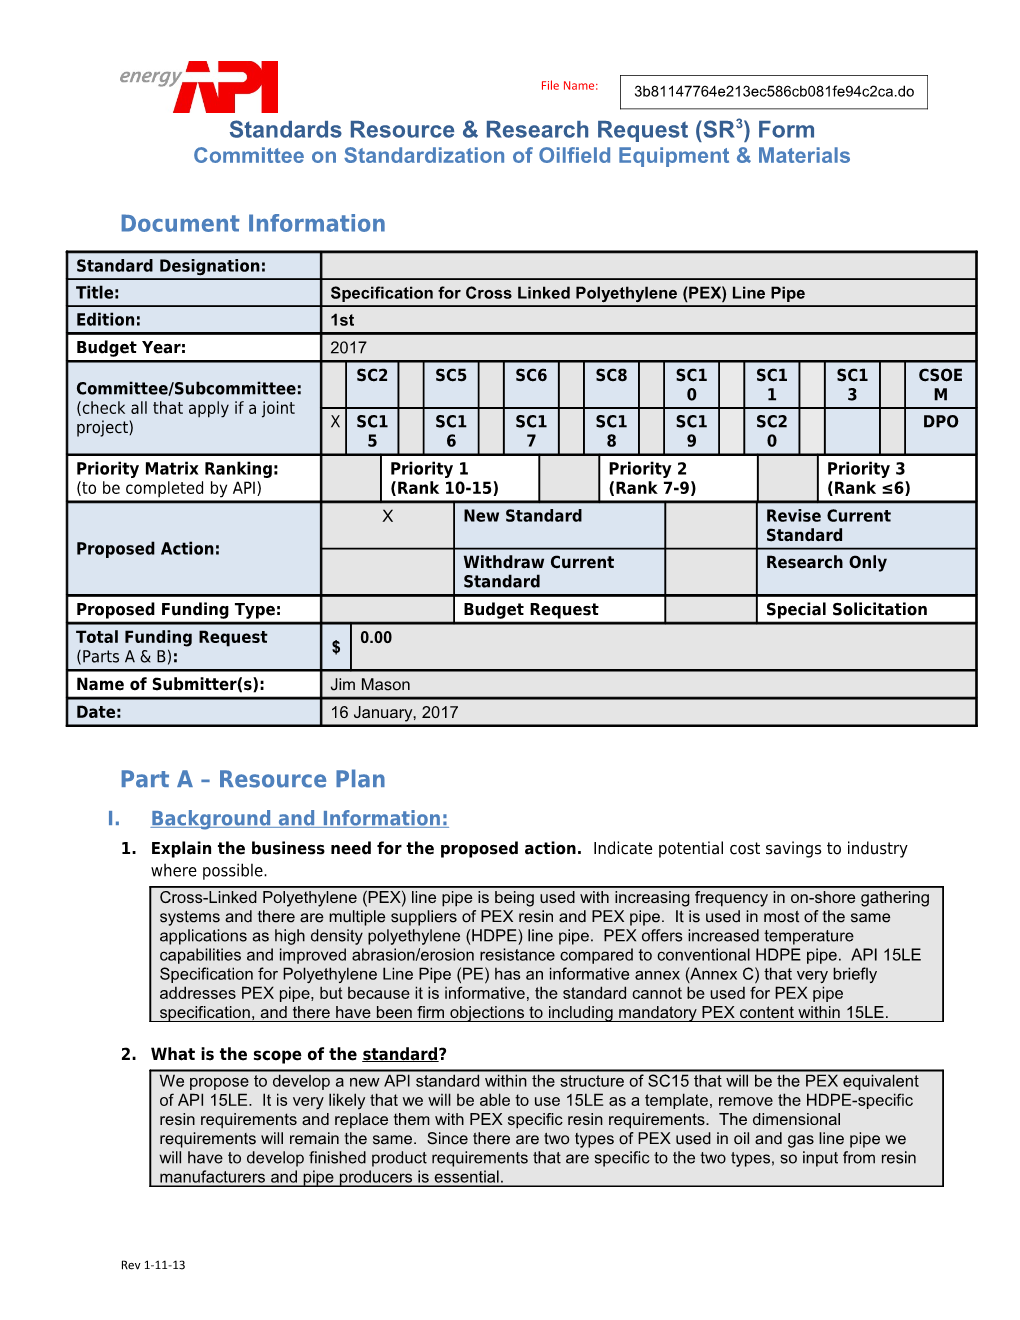 Standards Resource & Research Request (SR3) Form